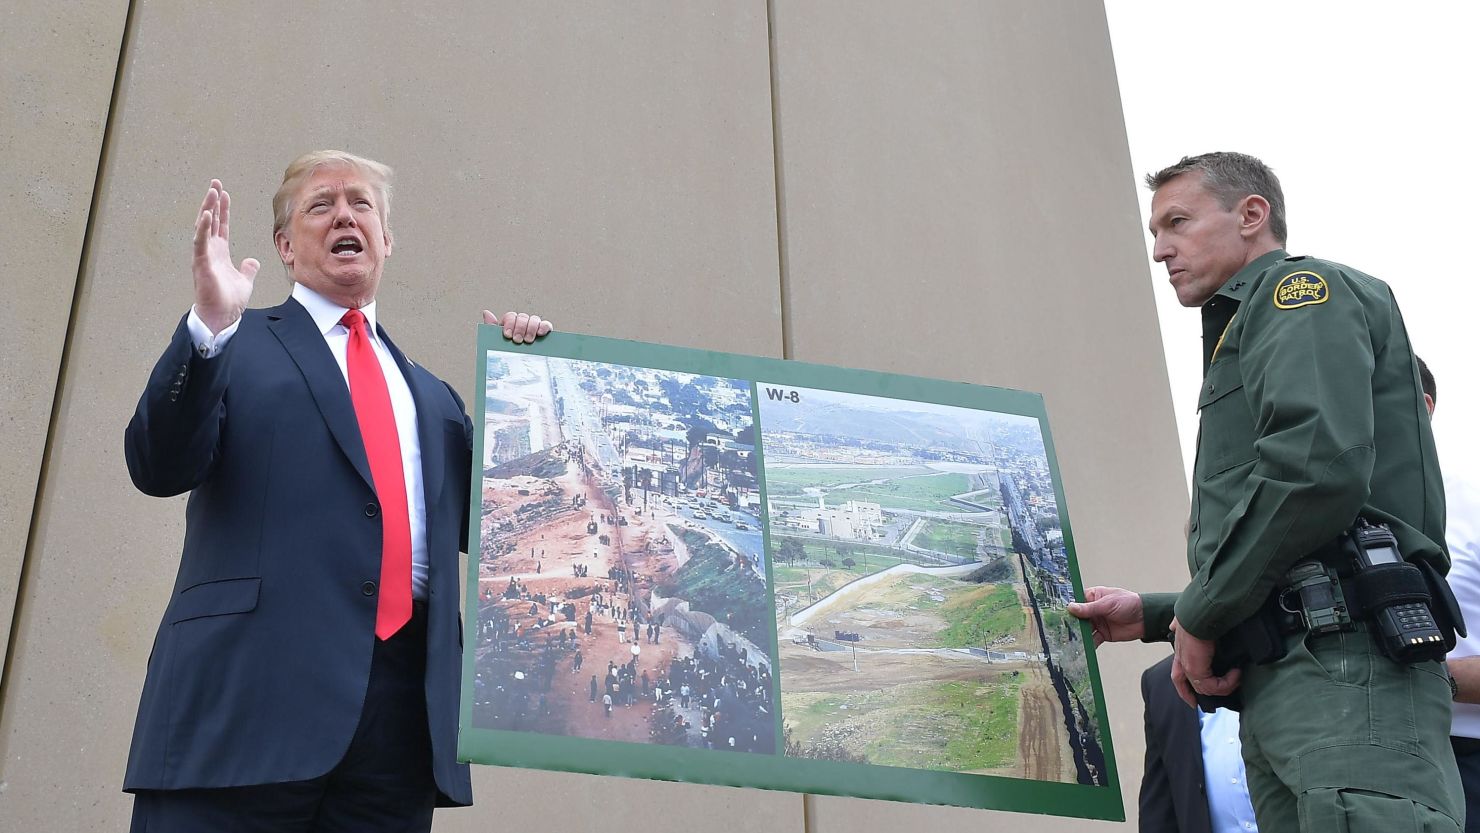 US President Donald Trump holds up a poster of before and after photos of a segment of the  border wall prototypes with Chief Patrol Agent Rodney S. Scott in San Diego, California on March 13, 2018. 